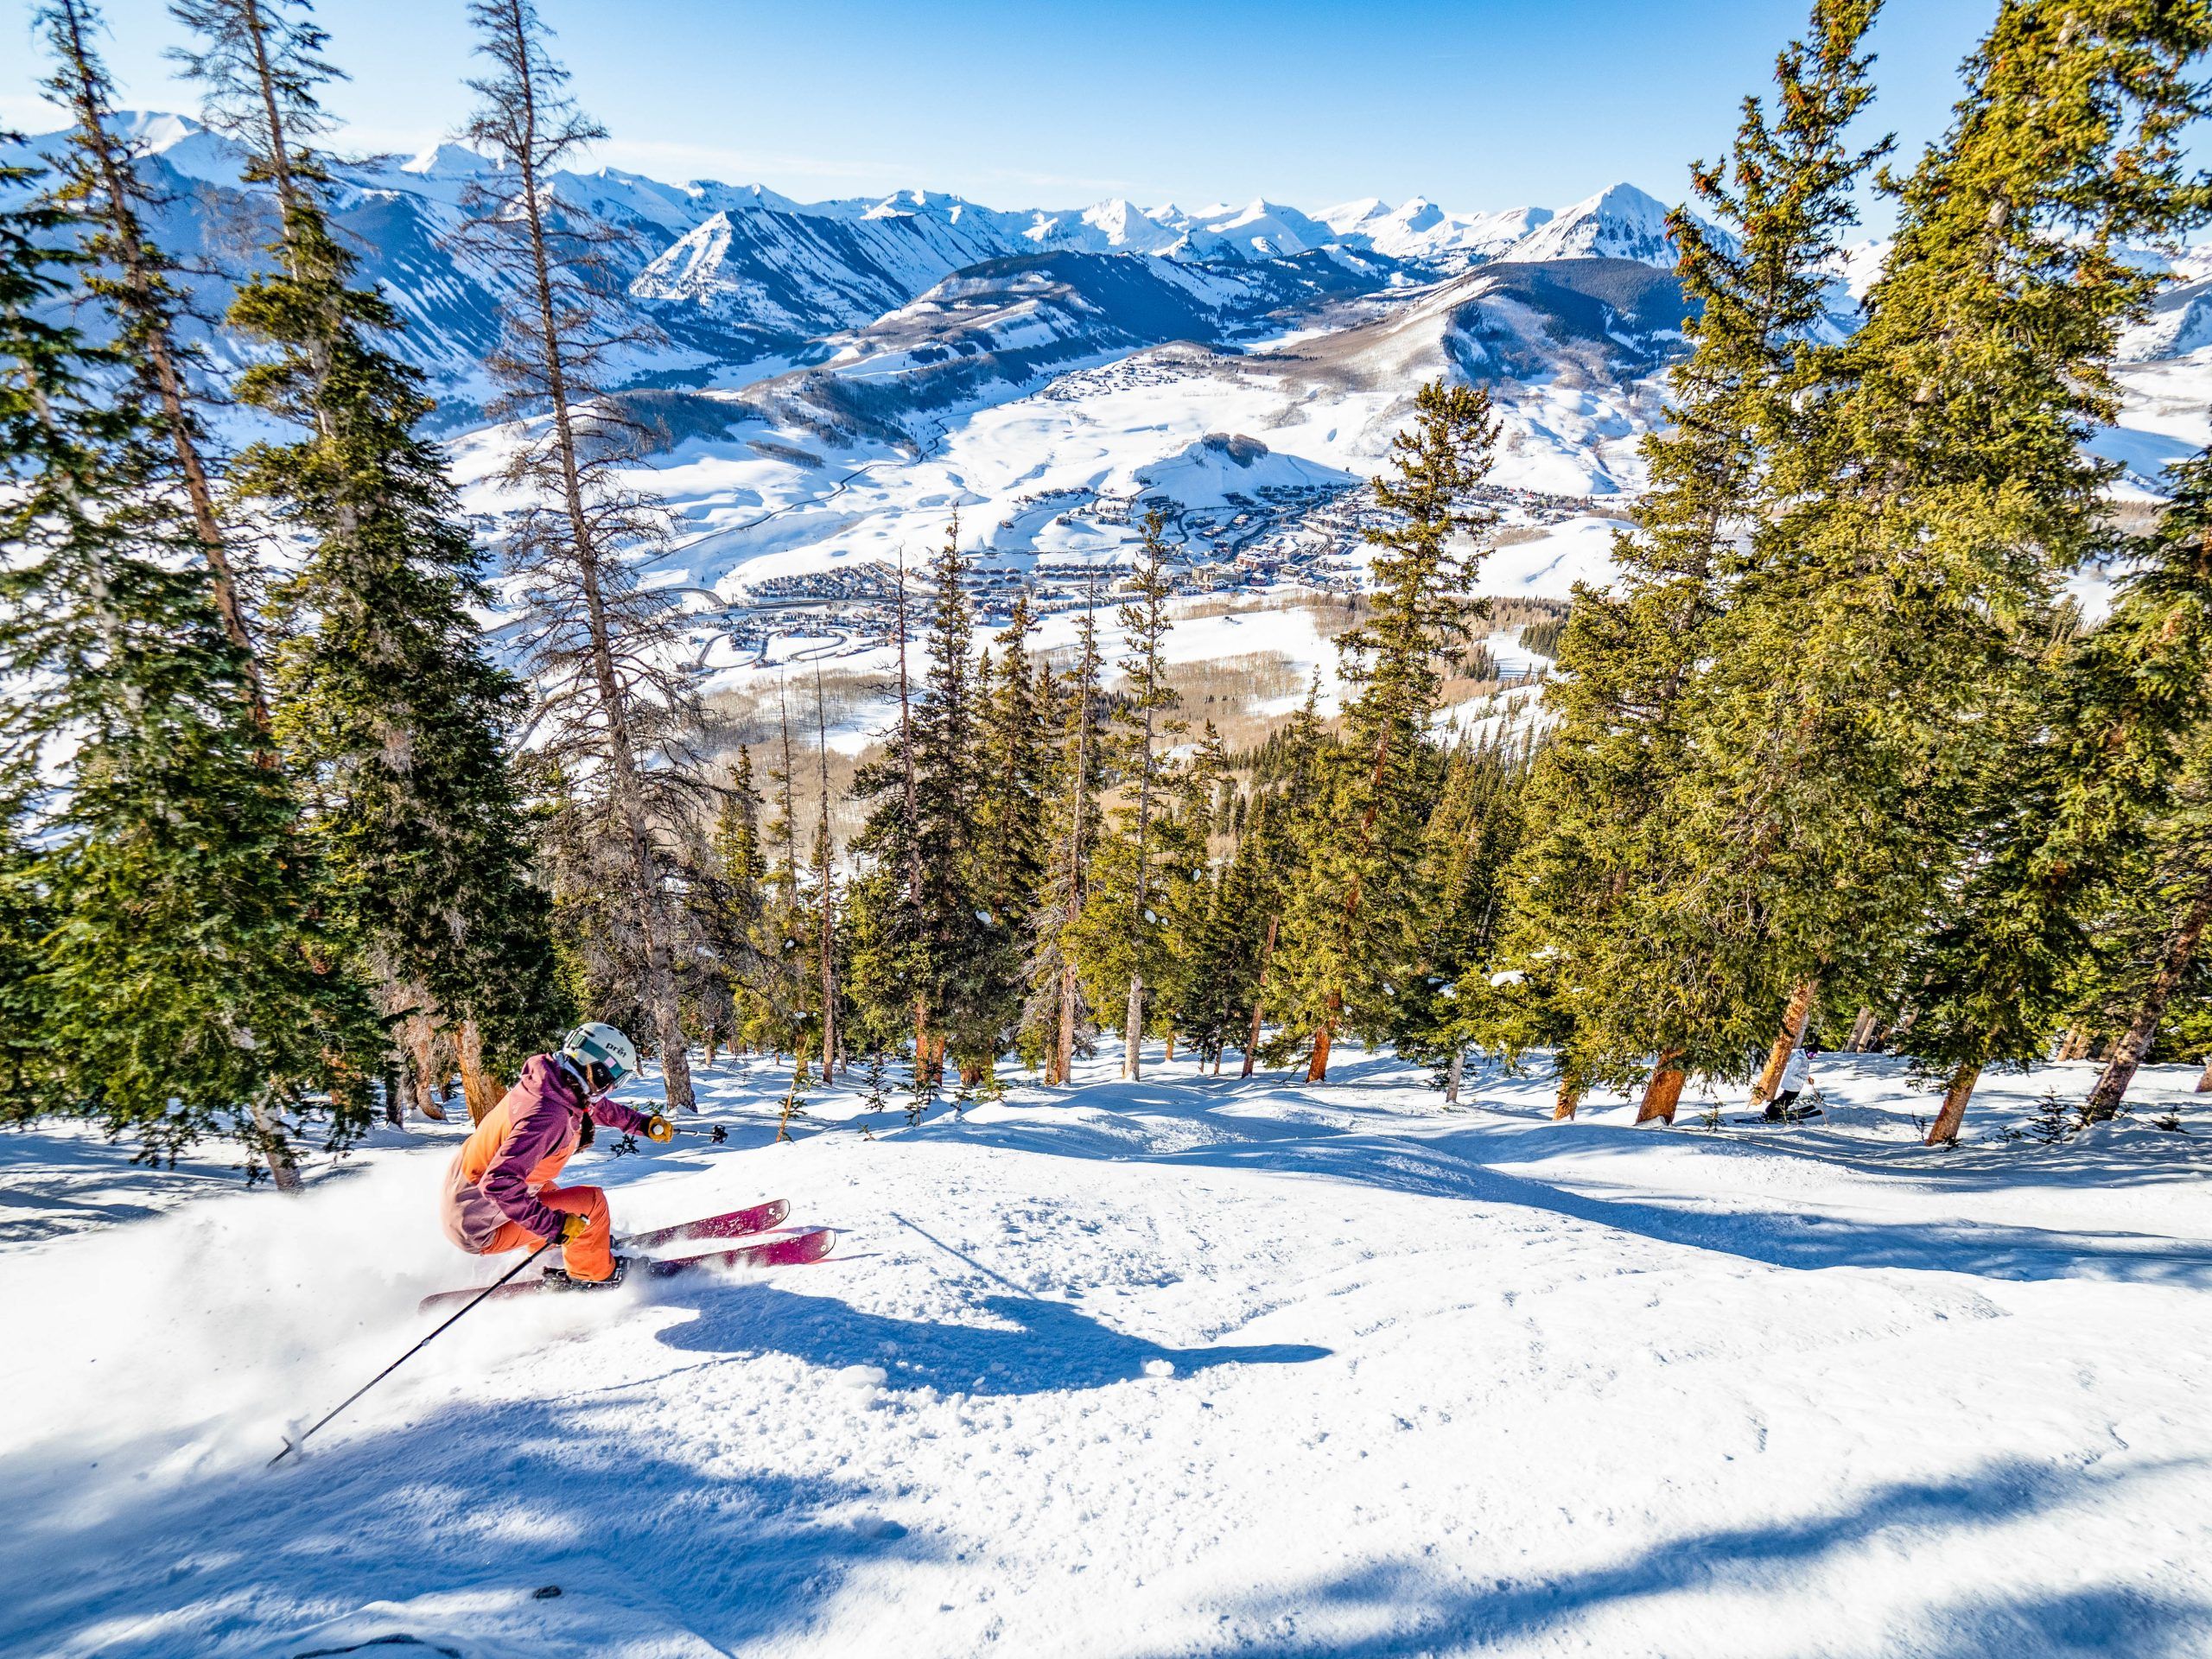 A woman skis on a steep off-piste run through conifer trees on a ski trip to Crested Butte.